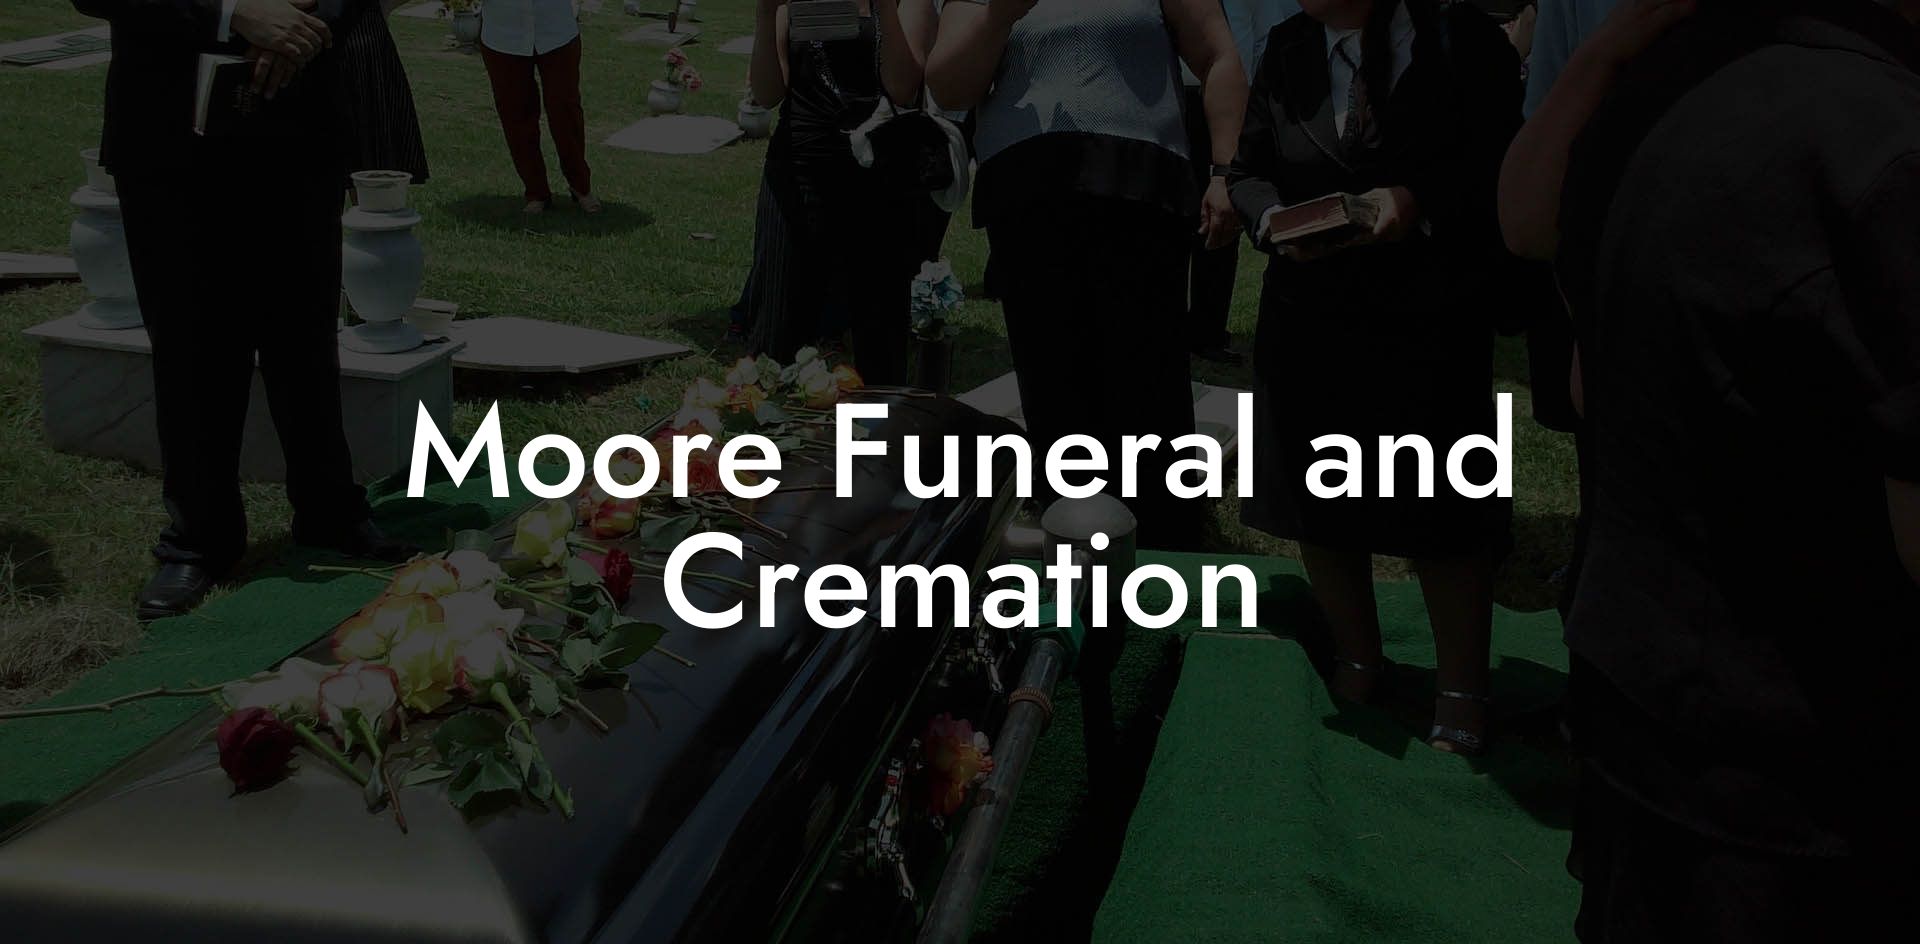 Moore Funeral and Cremation